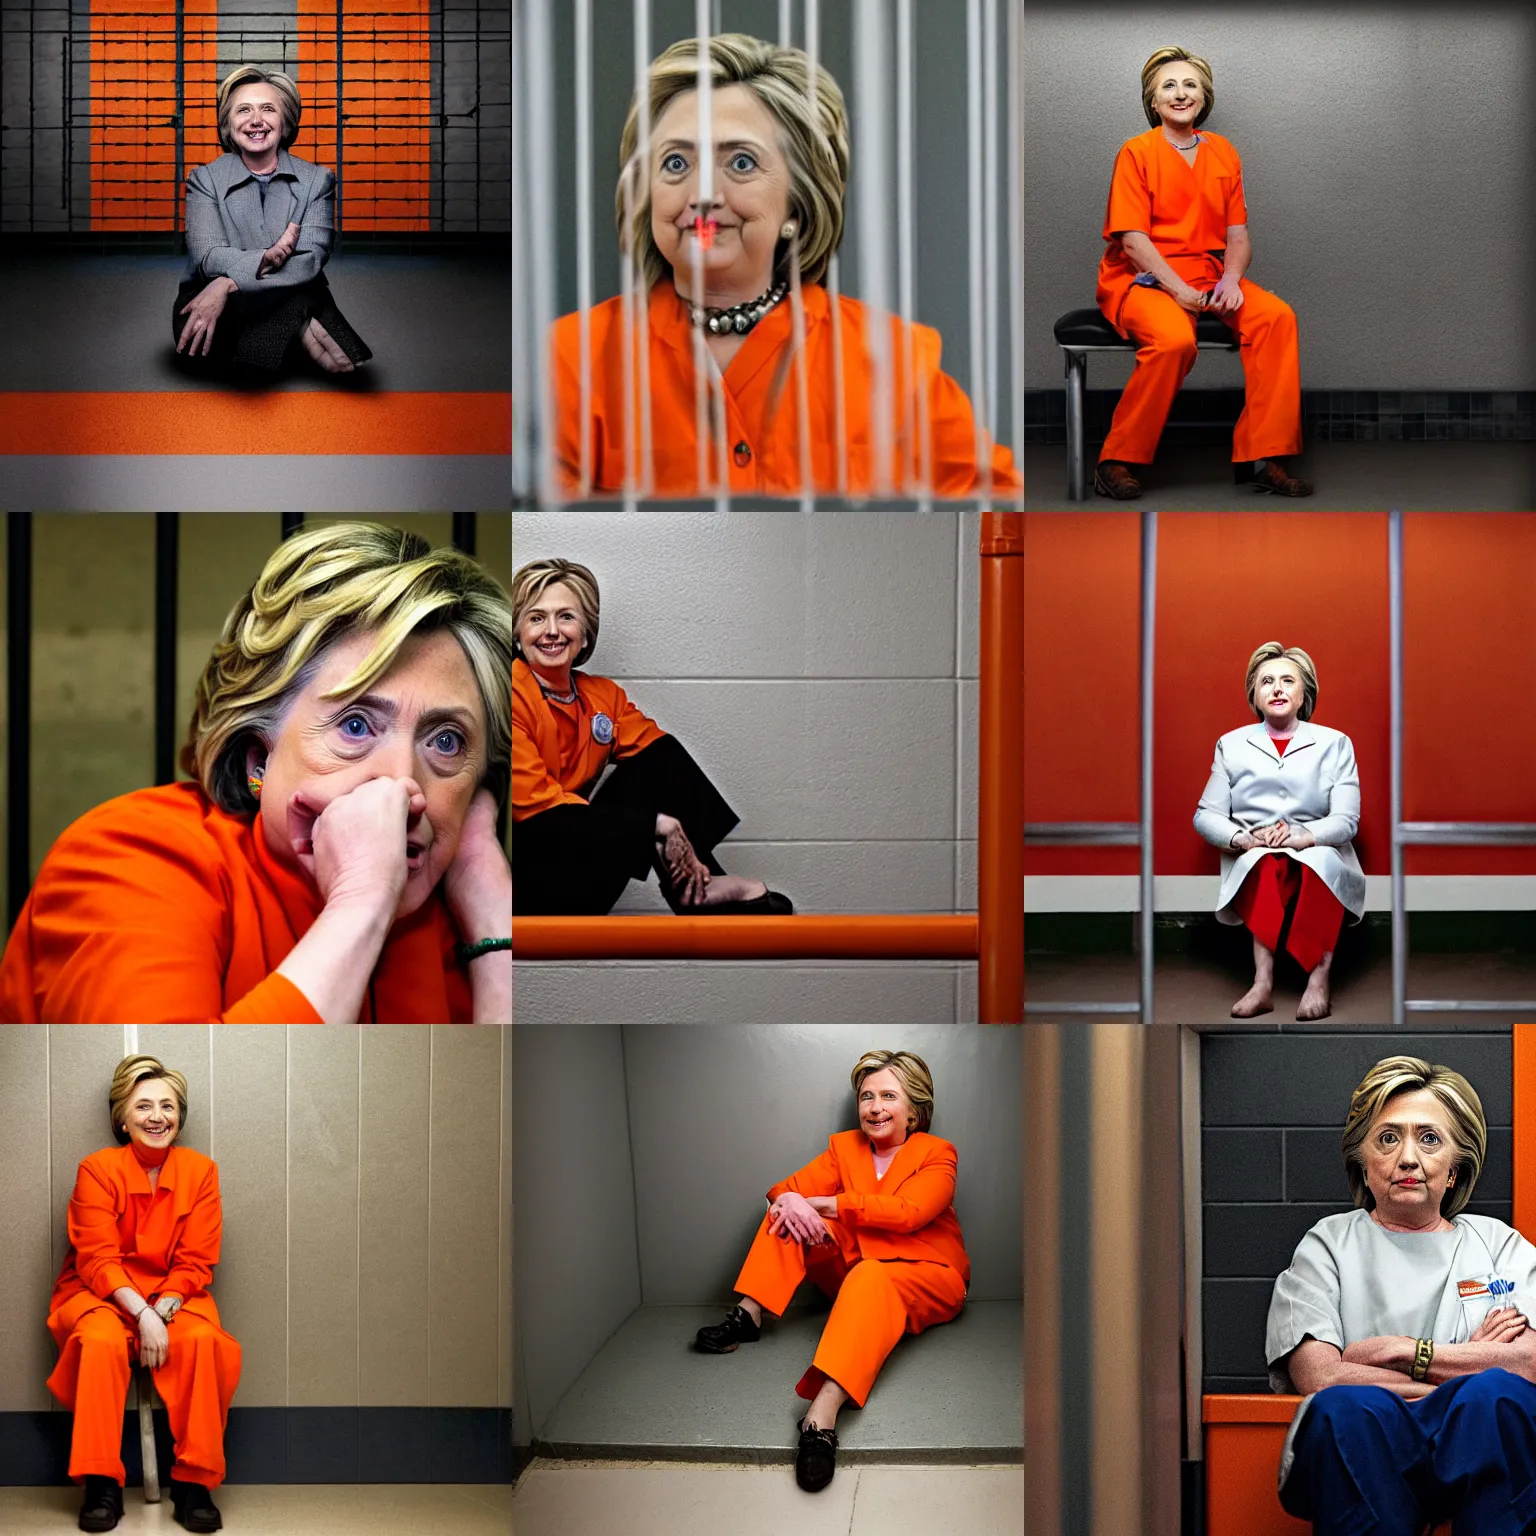 Prompt: photo, national geographic, hillary clinton sitting in a jail cell behind bars, dressed in orange inmate attire, award winning, 5 0 mm, blurred background,